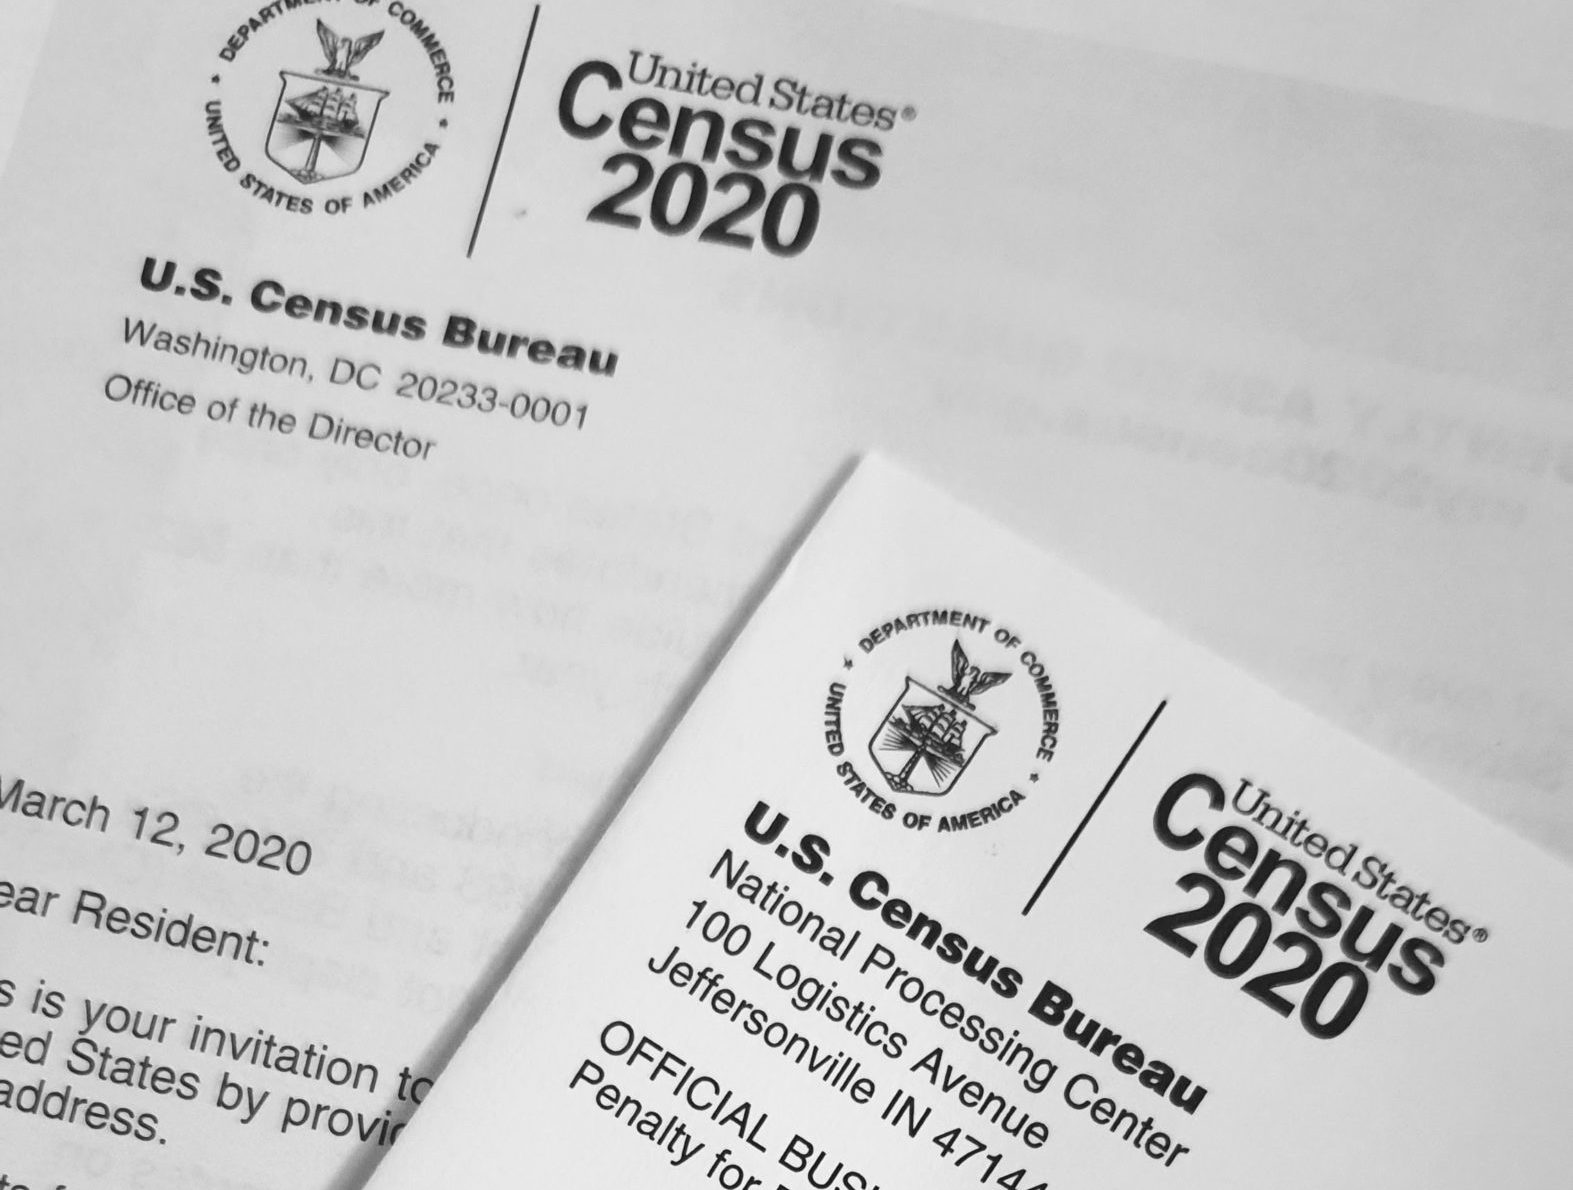 COVID-19 Could Push Census 2020 to October